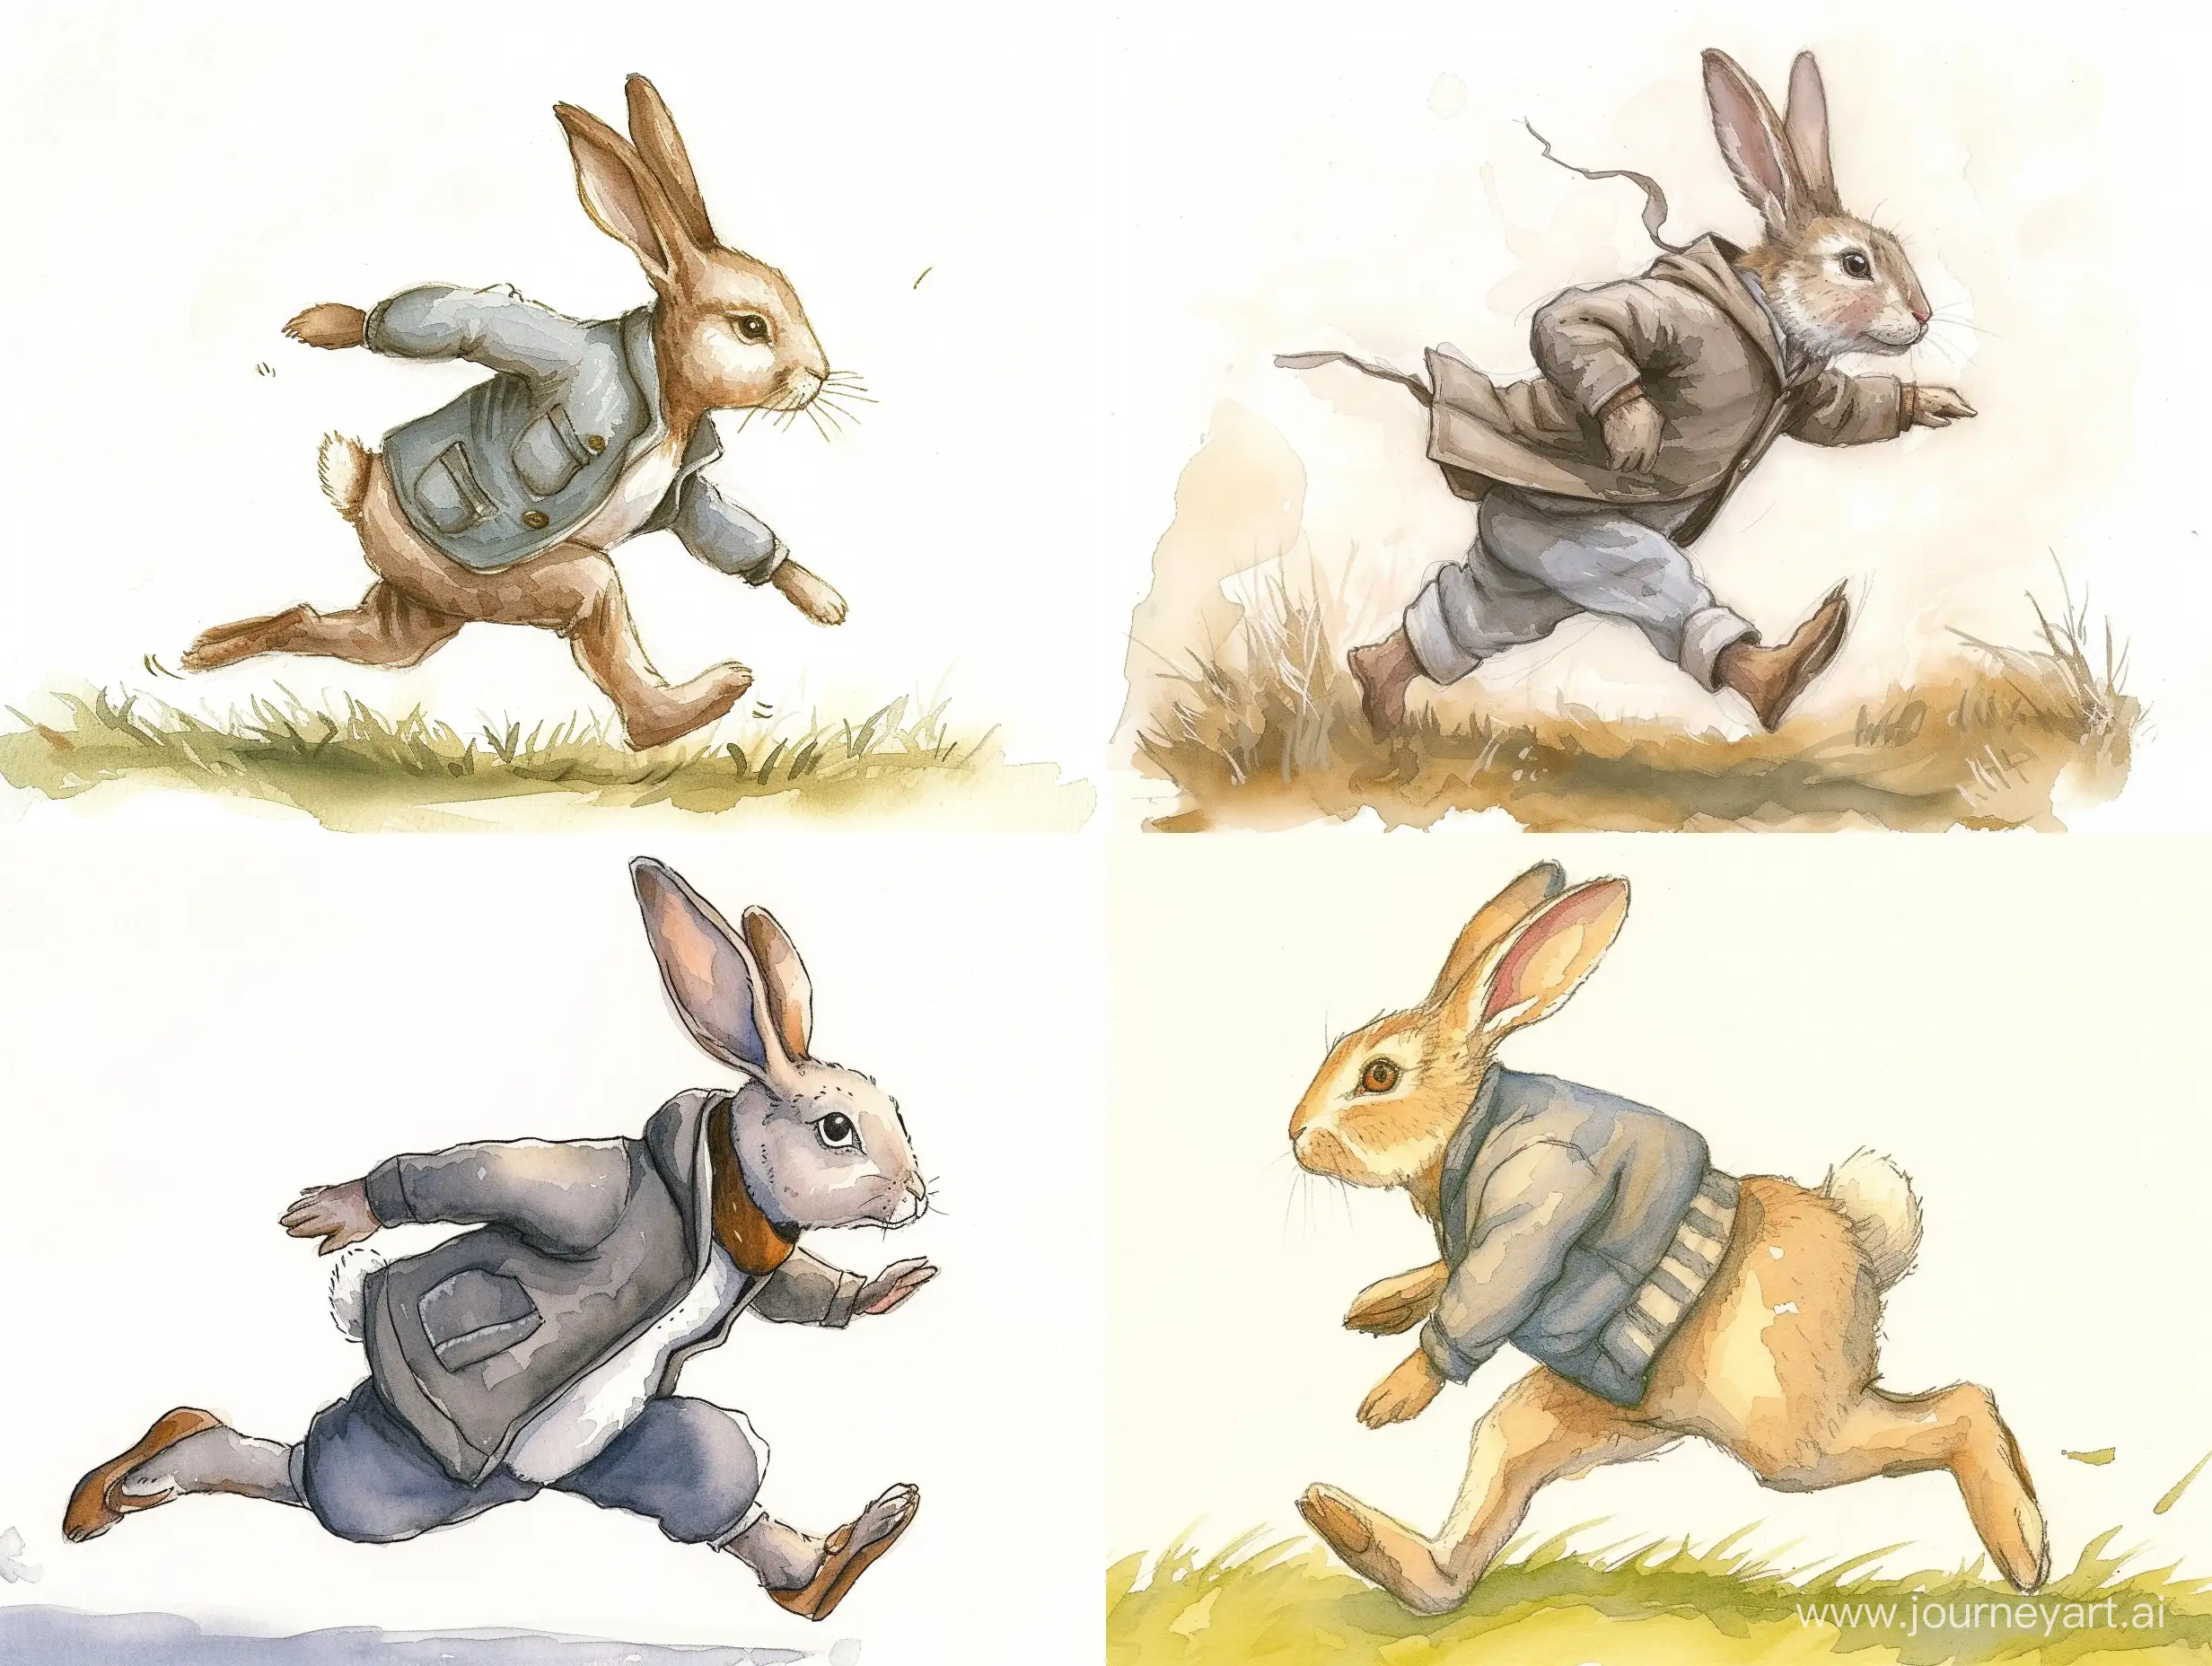 Whimsical-Watercolor-Illustration-Playful-Anthropomorphic-Rabbit-in-Outerwear